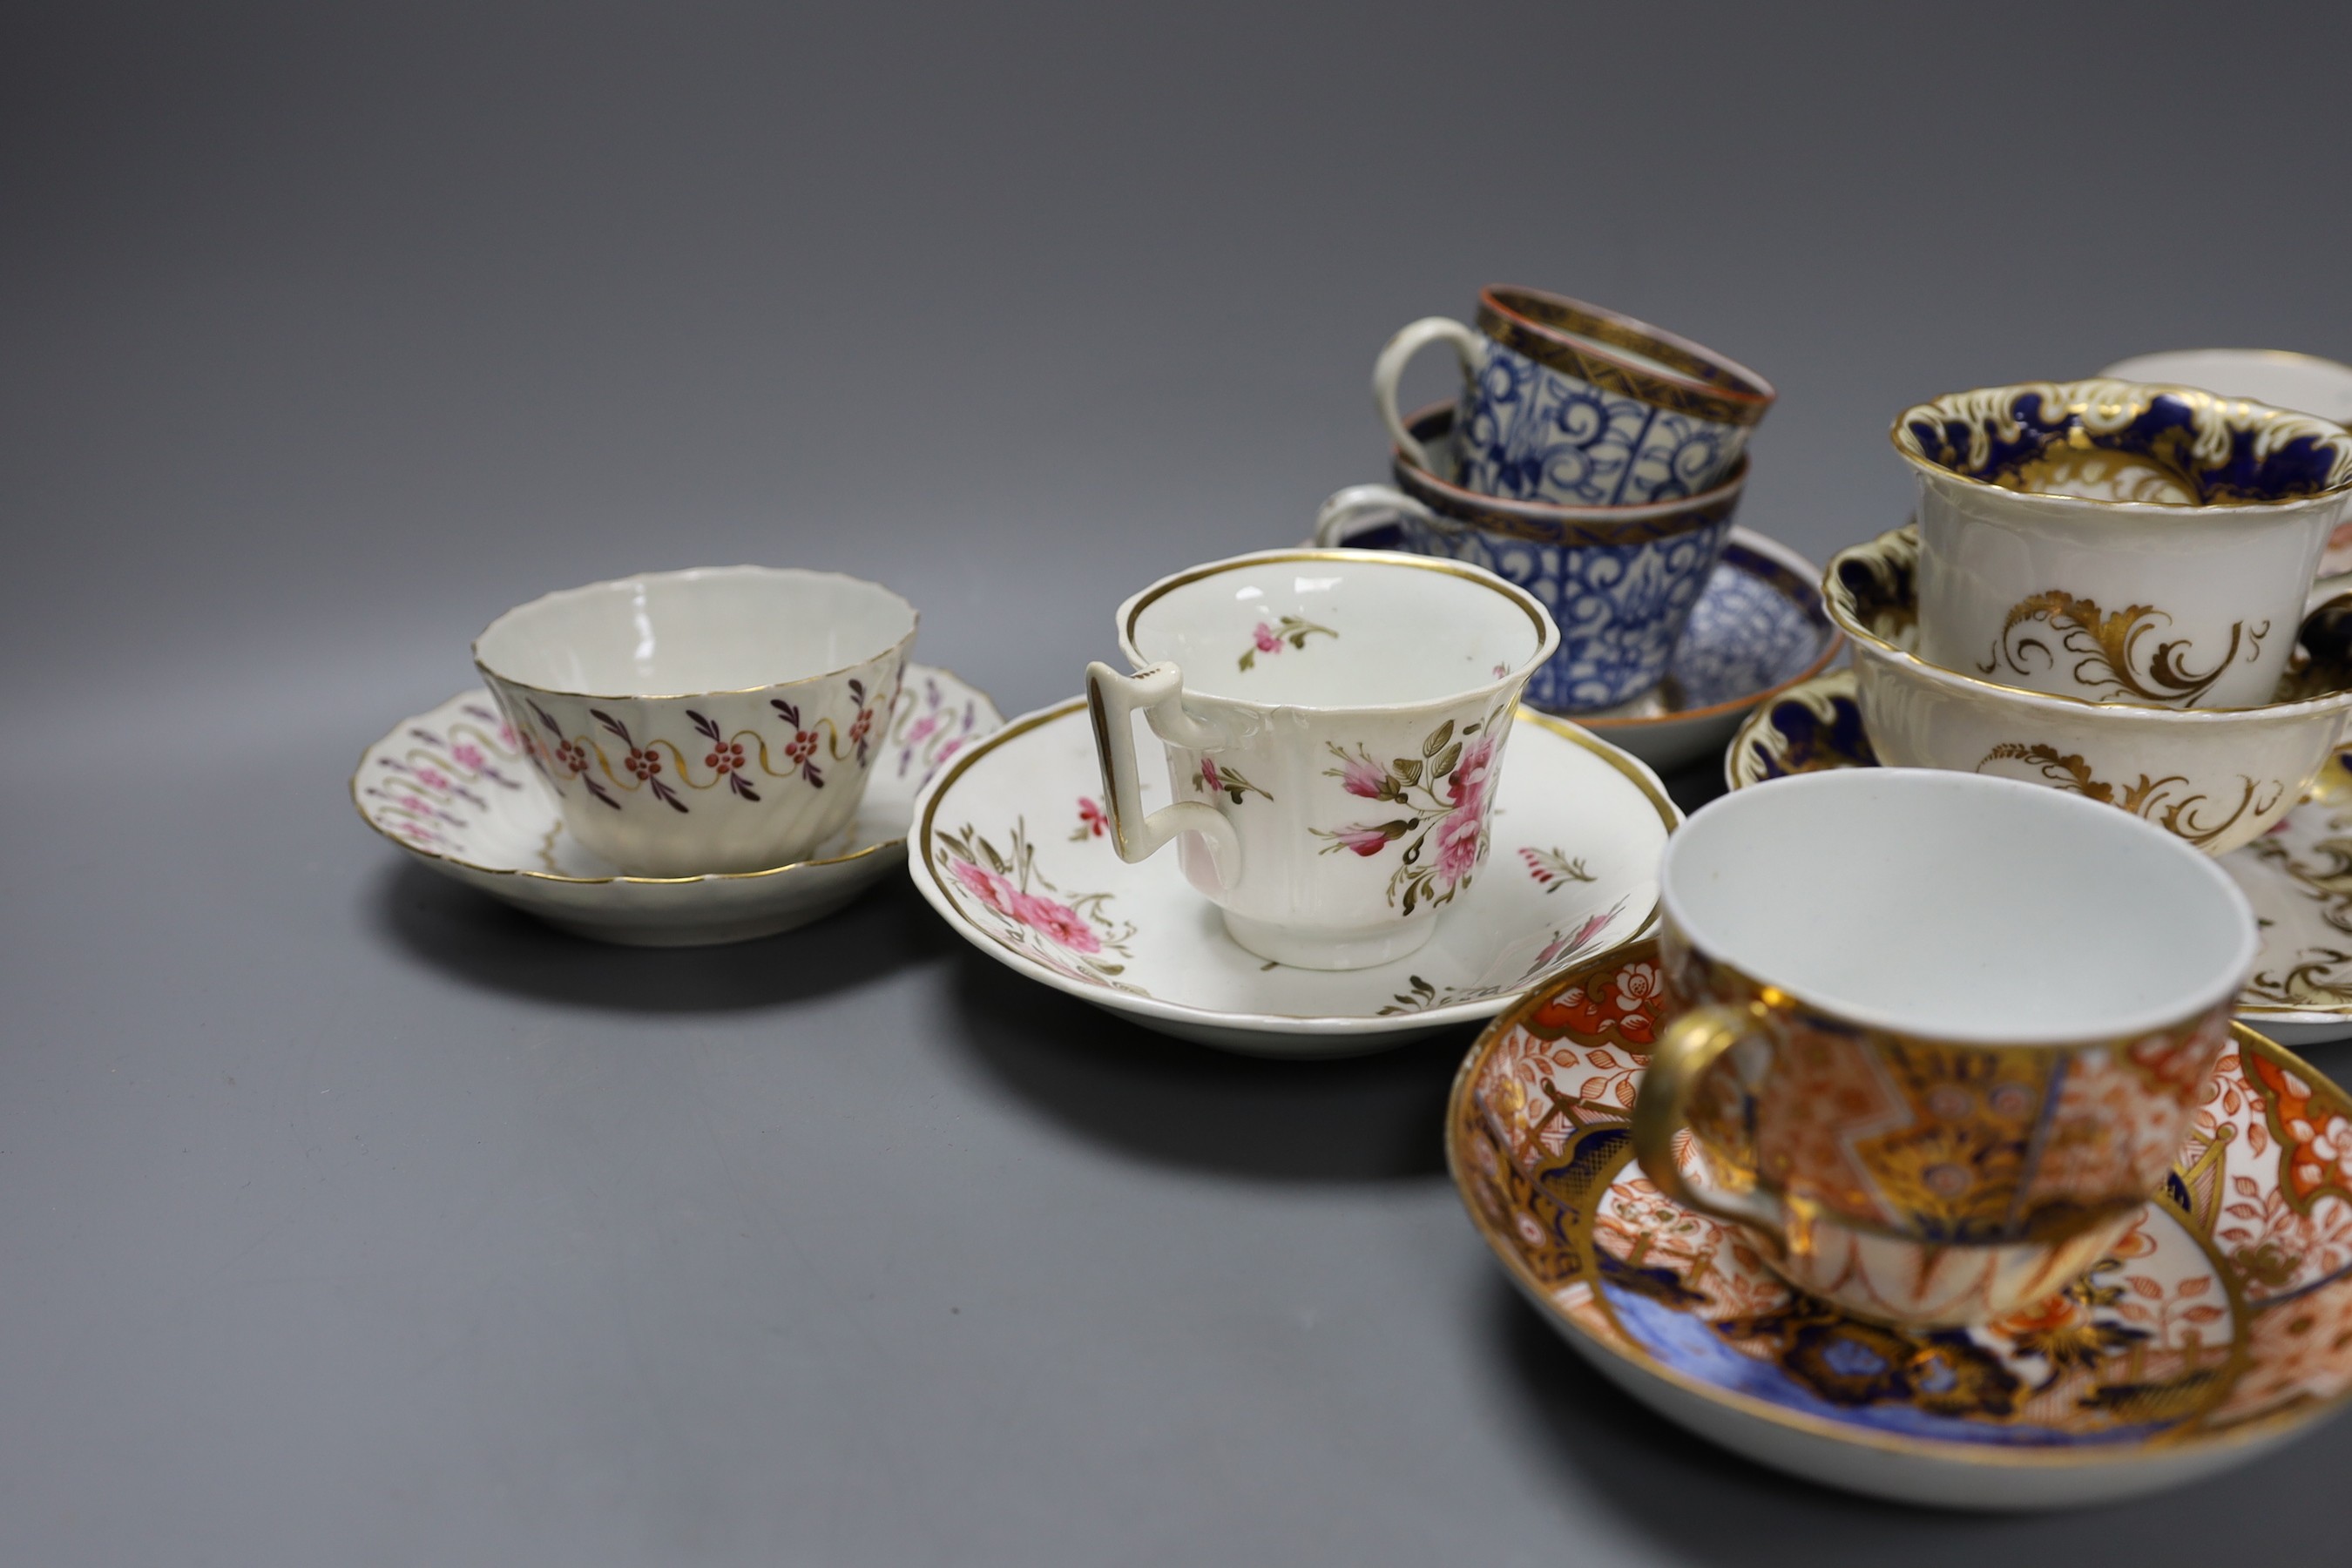 A Spode Imari pattern coffee can and saucer, a Coalport Imari cup and saucer, a Coalport style floral trio, a Worcester Royal Lily trio, a Flight teabowl and saucer and an English rose painted cup and saucer